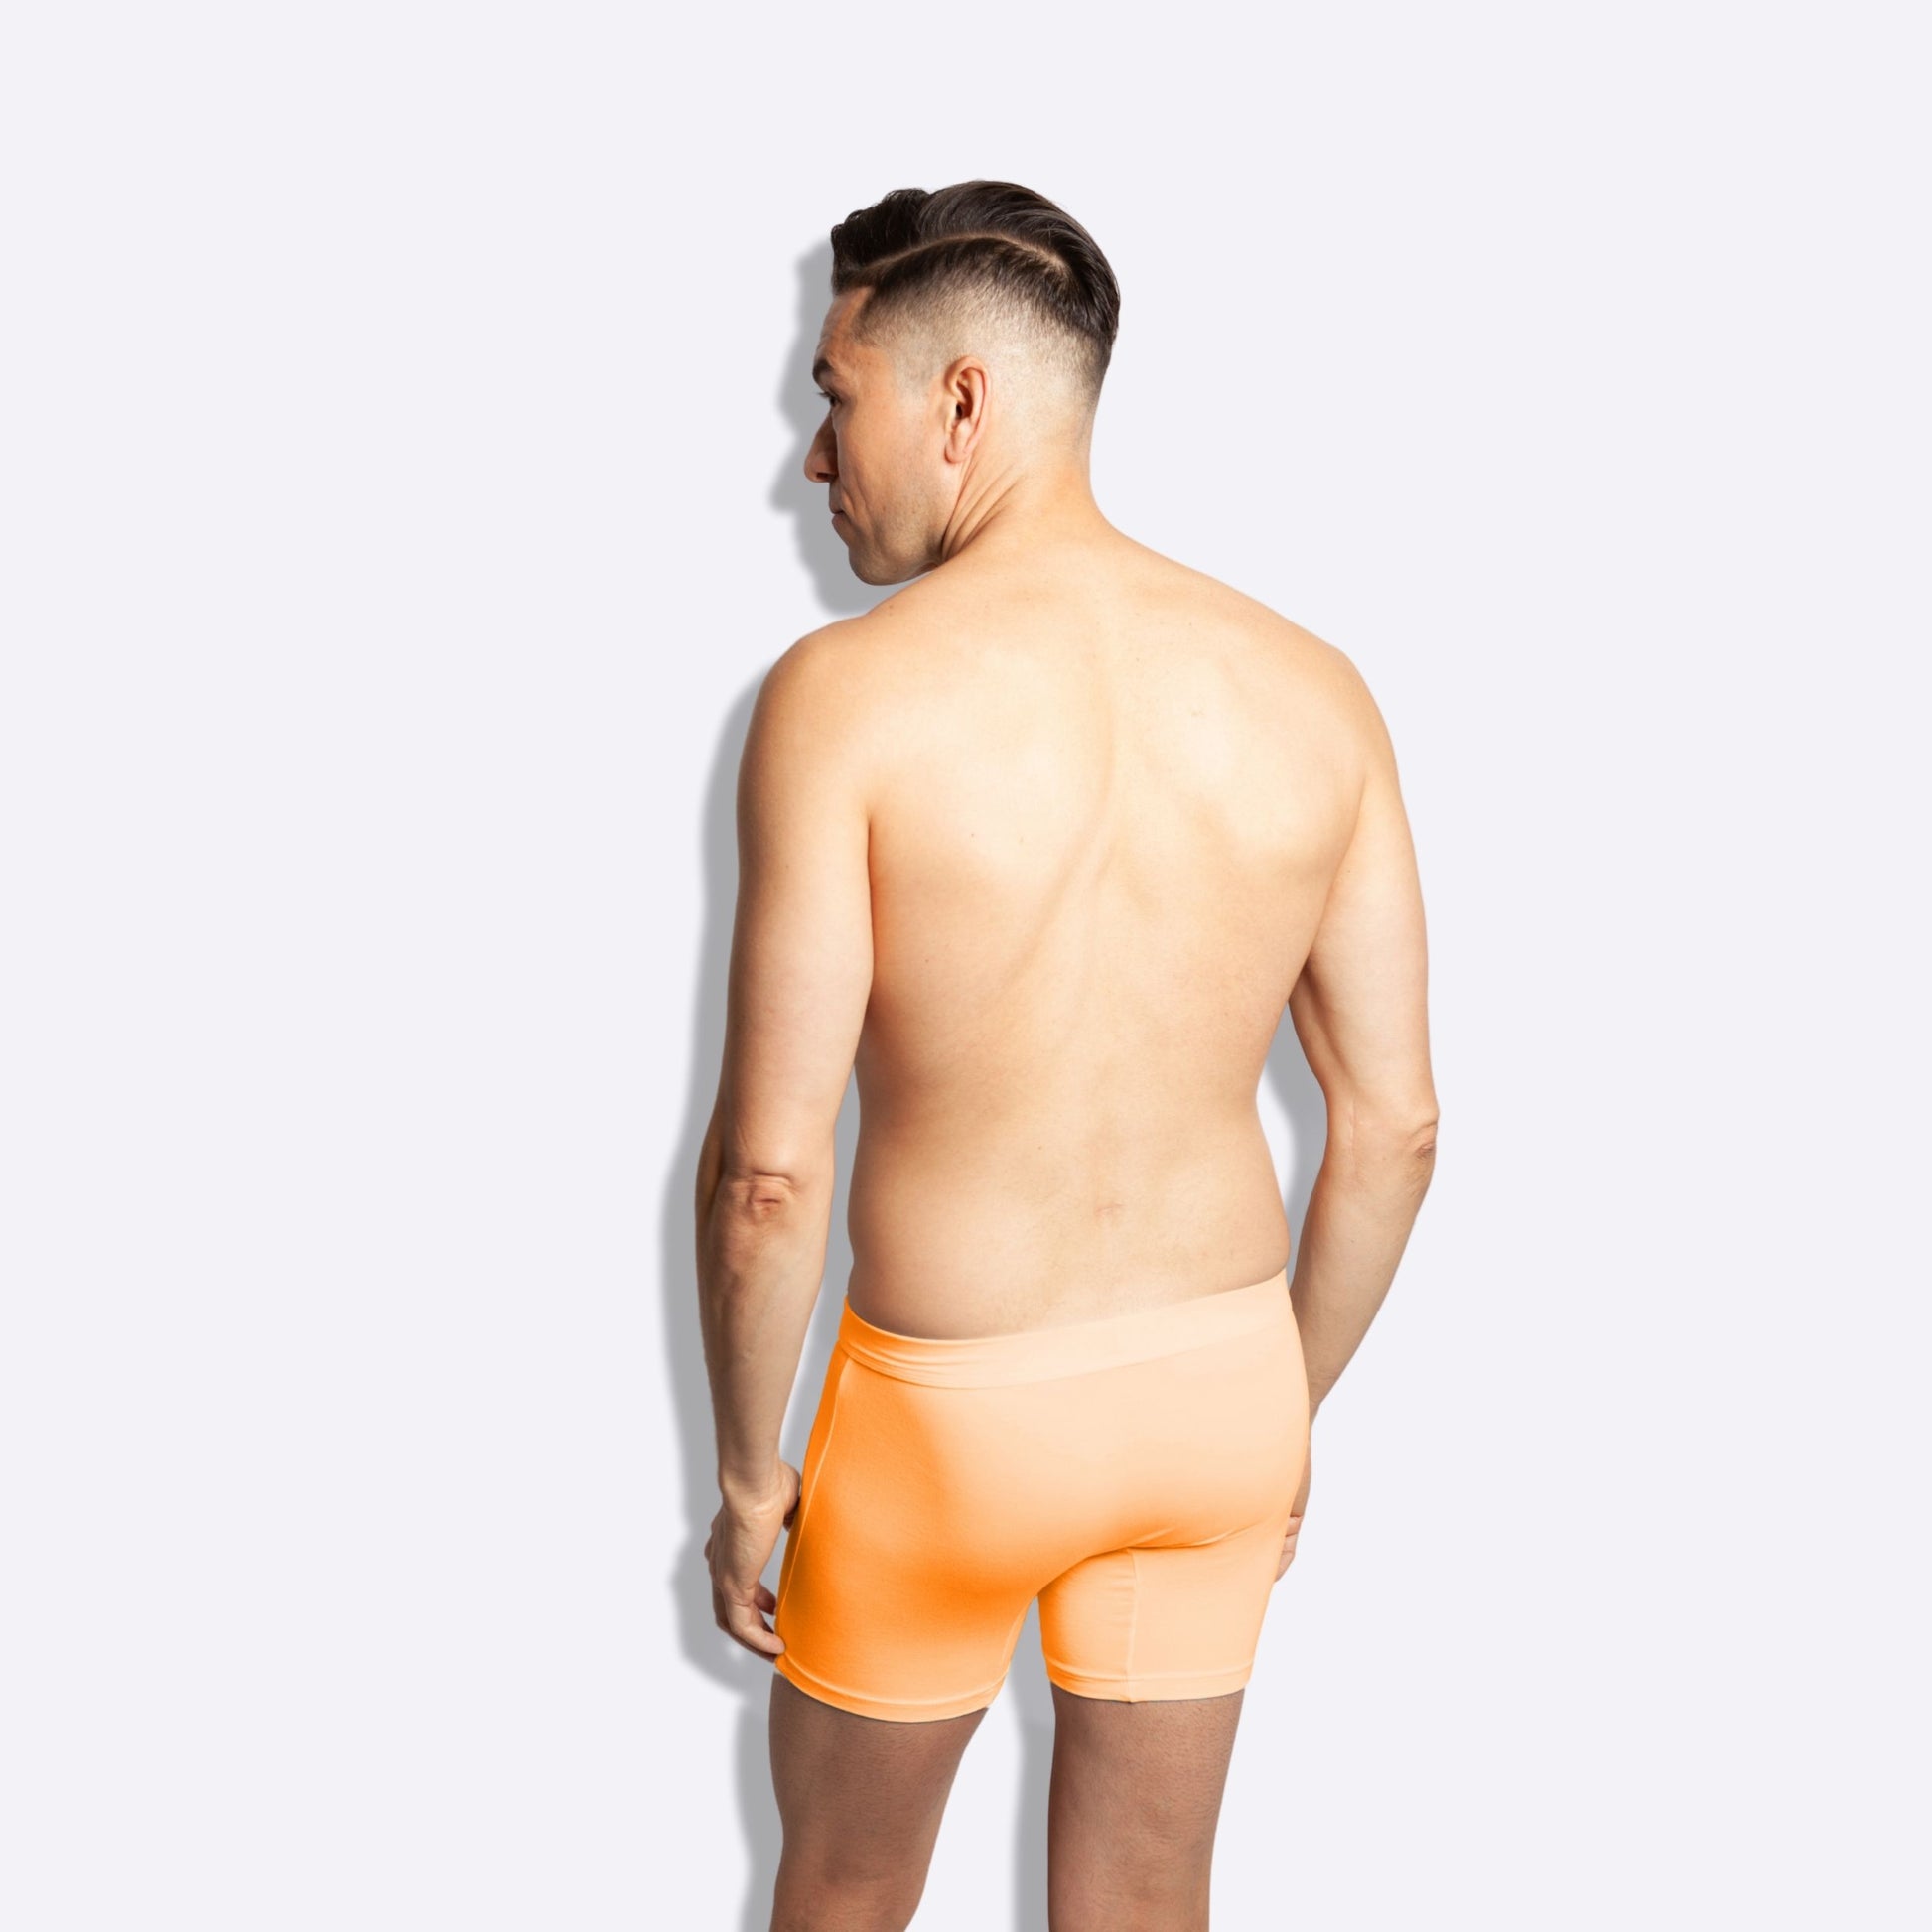 The Limited Edition Citrus Orange Boxer Brief for men in the USA and Canada